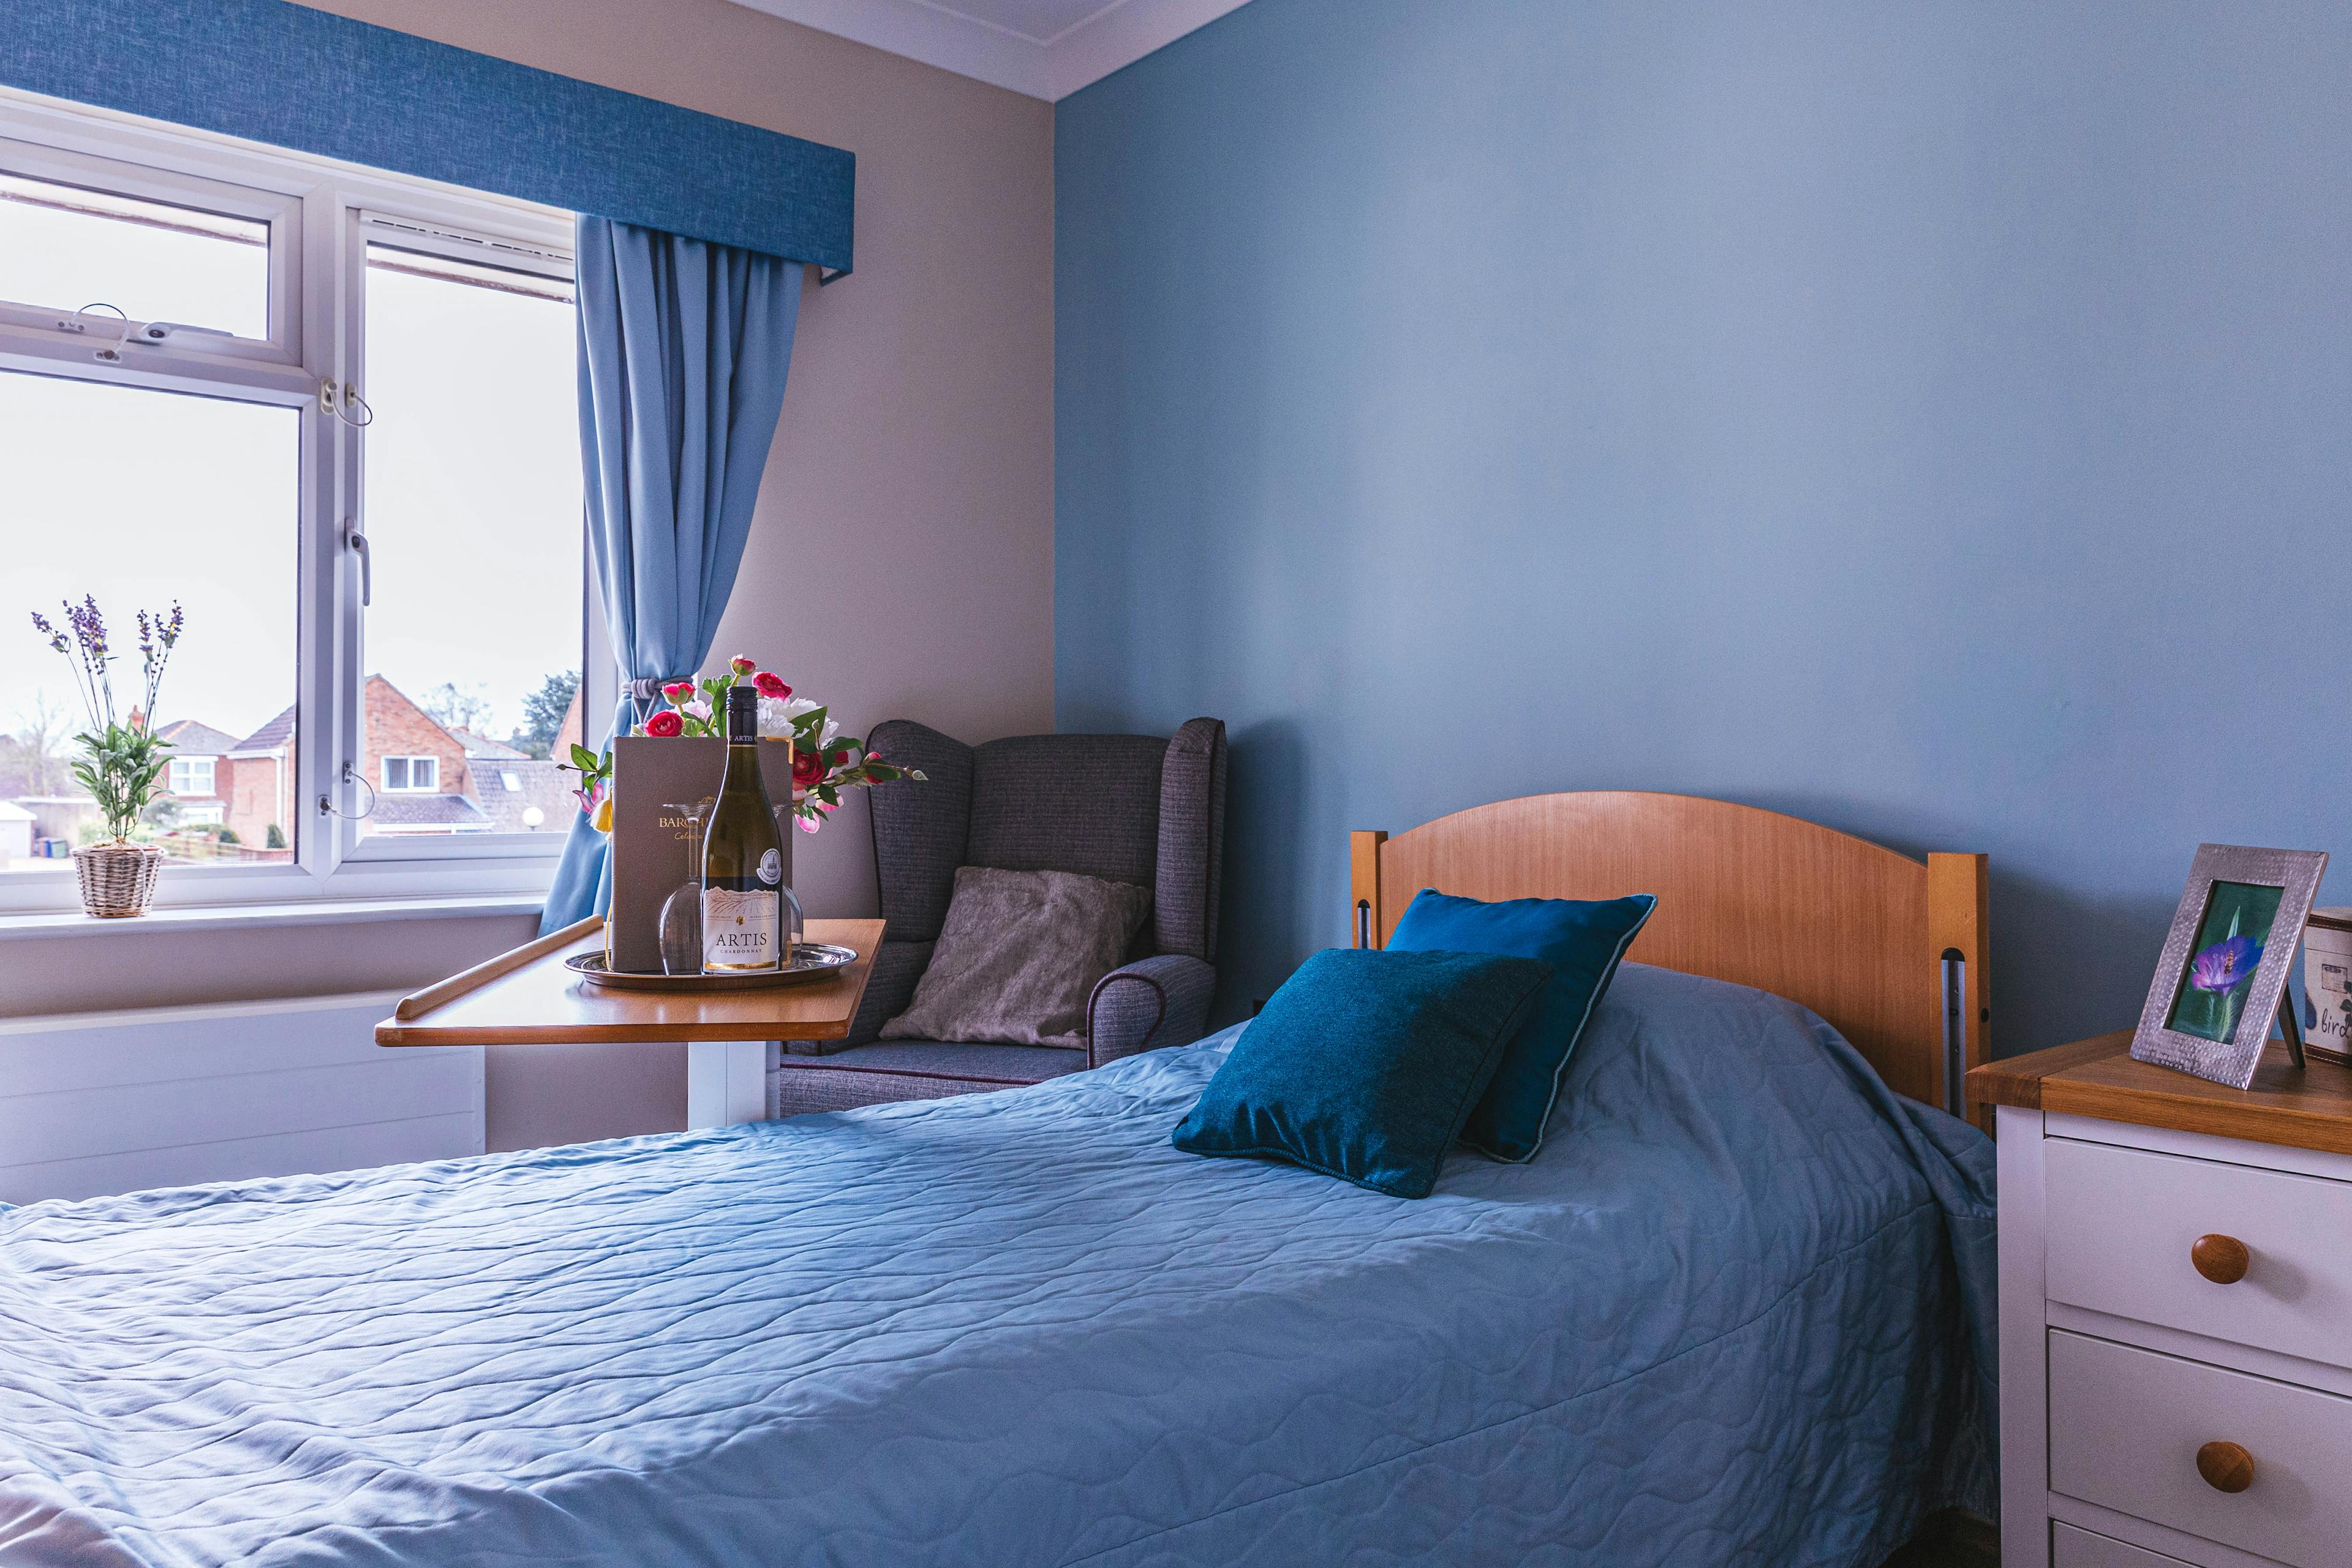 Bedroom at Rose Lodge Care Home in Wisbech, Cambridgeshire